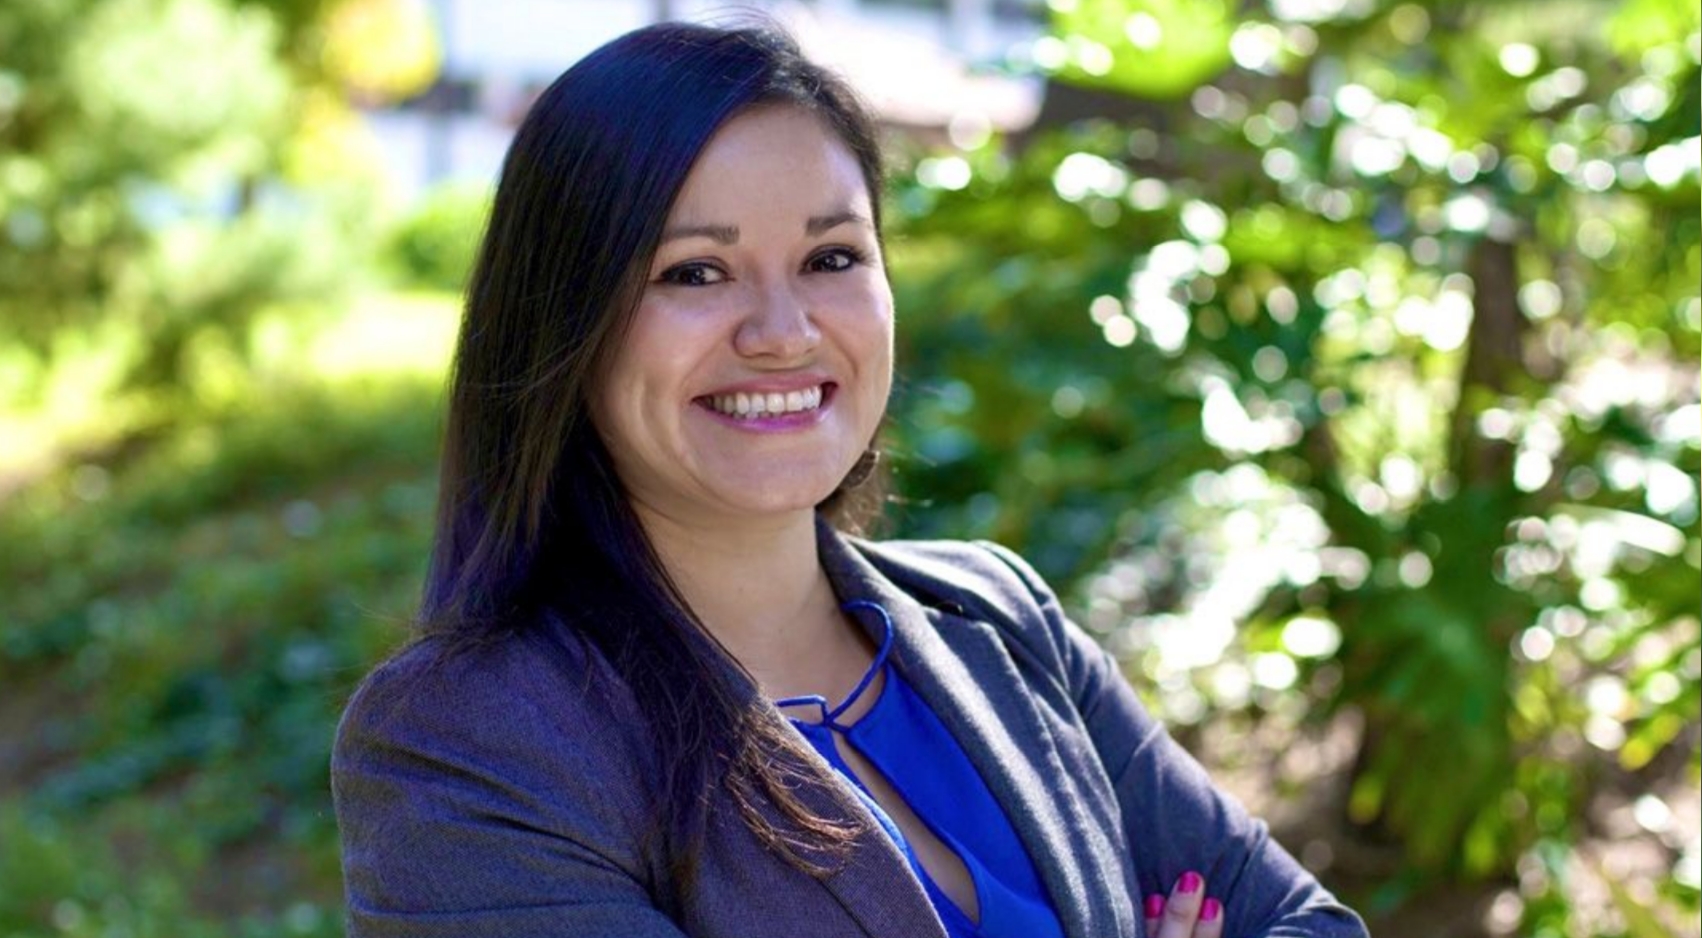 SDSU assistant professor Marissa Vasquez is one of 25 women spotlighted by Diverse: Issues in Higher Education as part of their 11th annual Womens History Month special report.